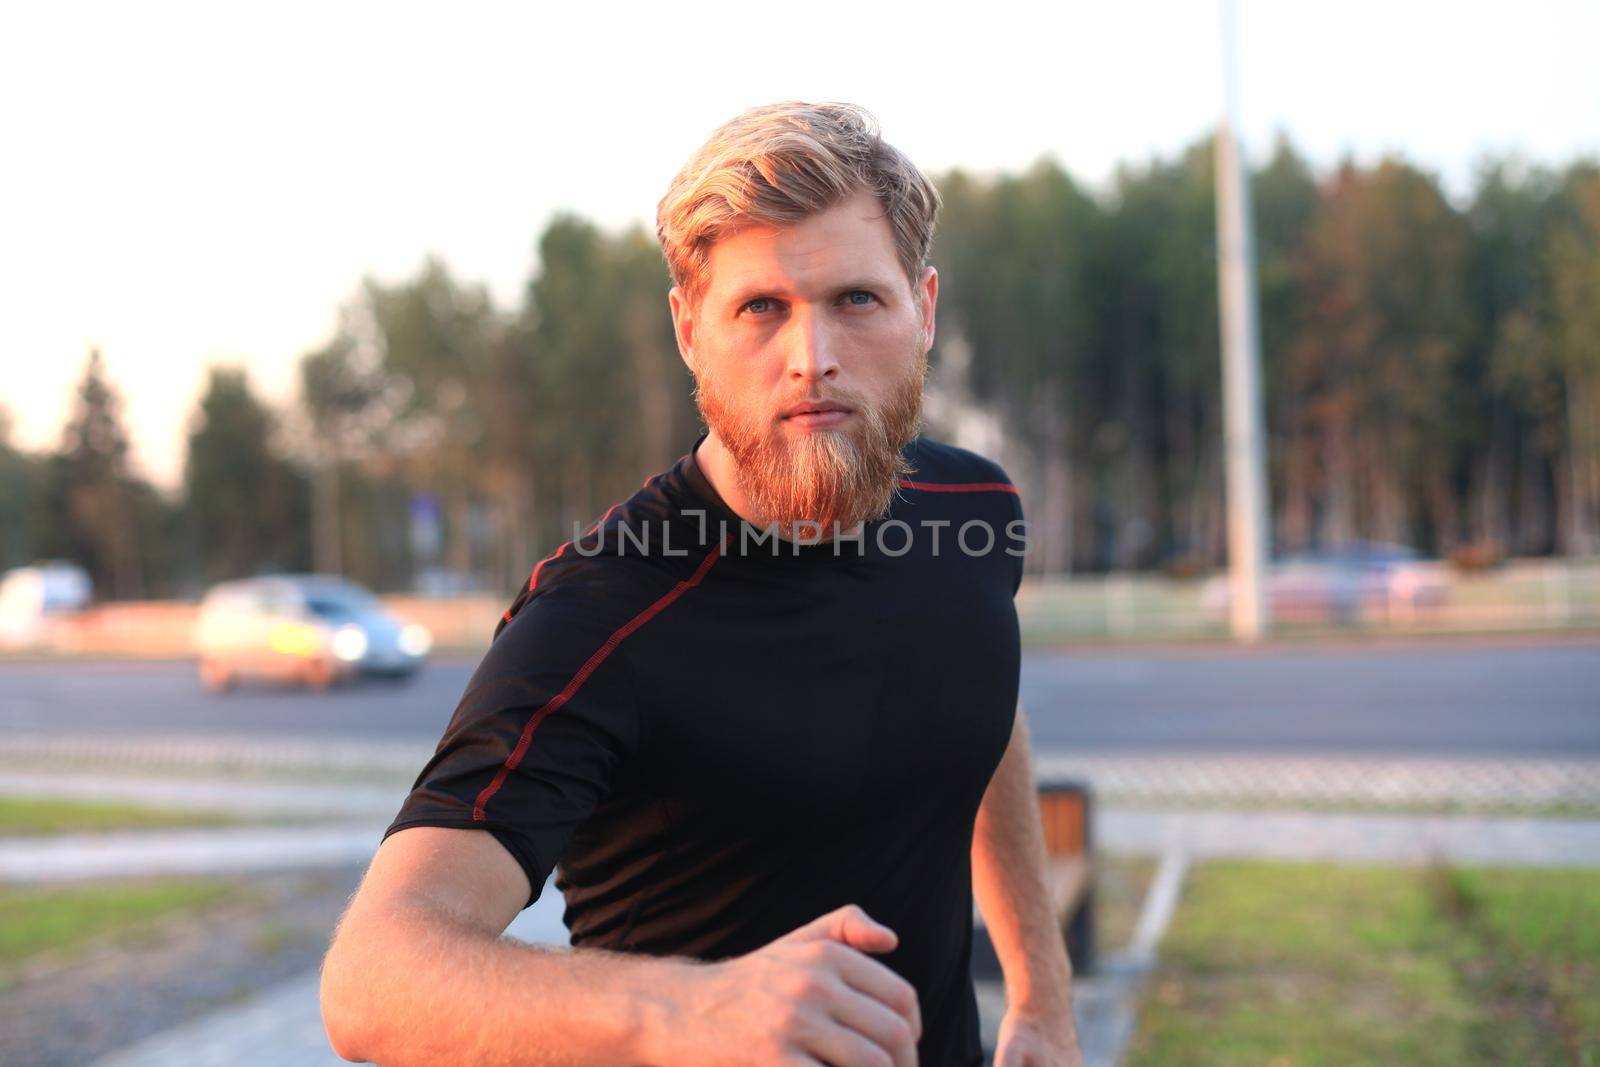 Fit athlete. Handsome adult man running outdoors to stay healthy, at sunset or sunrise. Runner by tsyhun